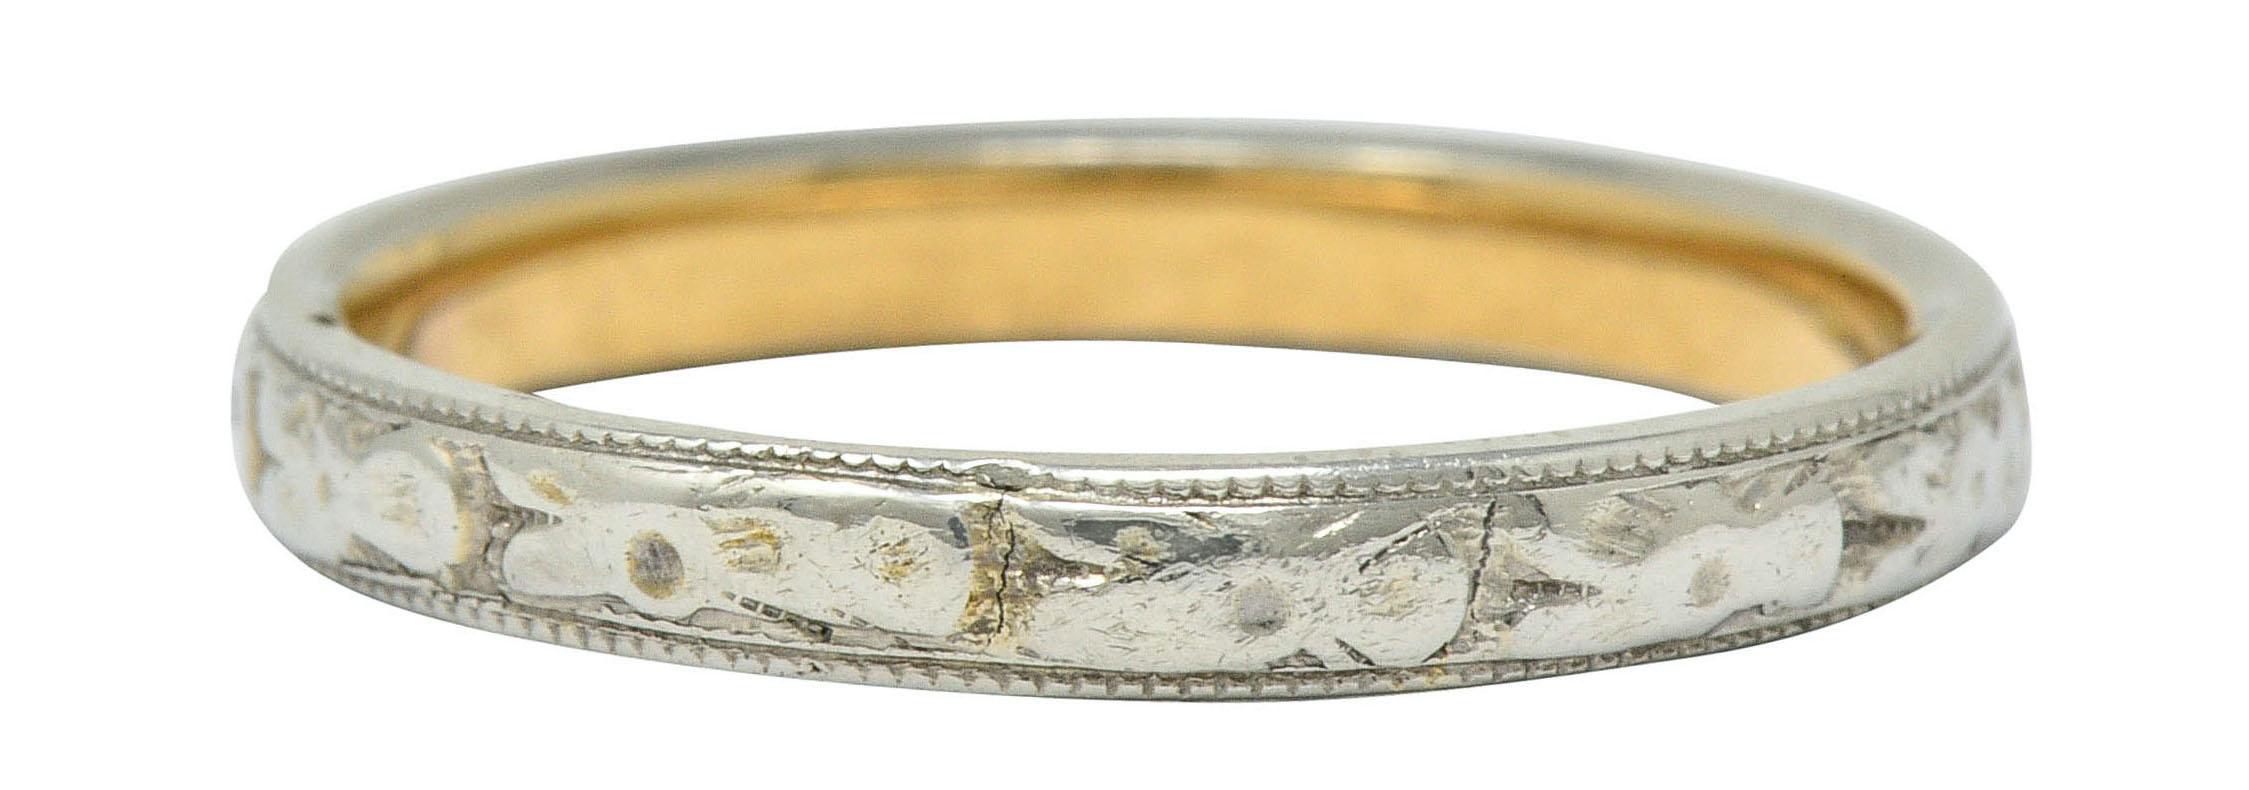 Band ring features highly rendered white gold orange blossom motif and milgrain edges

Inner shank is yellow gold with a dated inscription

Stamped 14K for 14 karat gold

Circa: 1920s

Ring Size: 8 & not sizable

Measures: 2.9 mm wide and sits 1.7